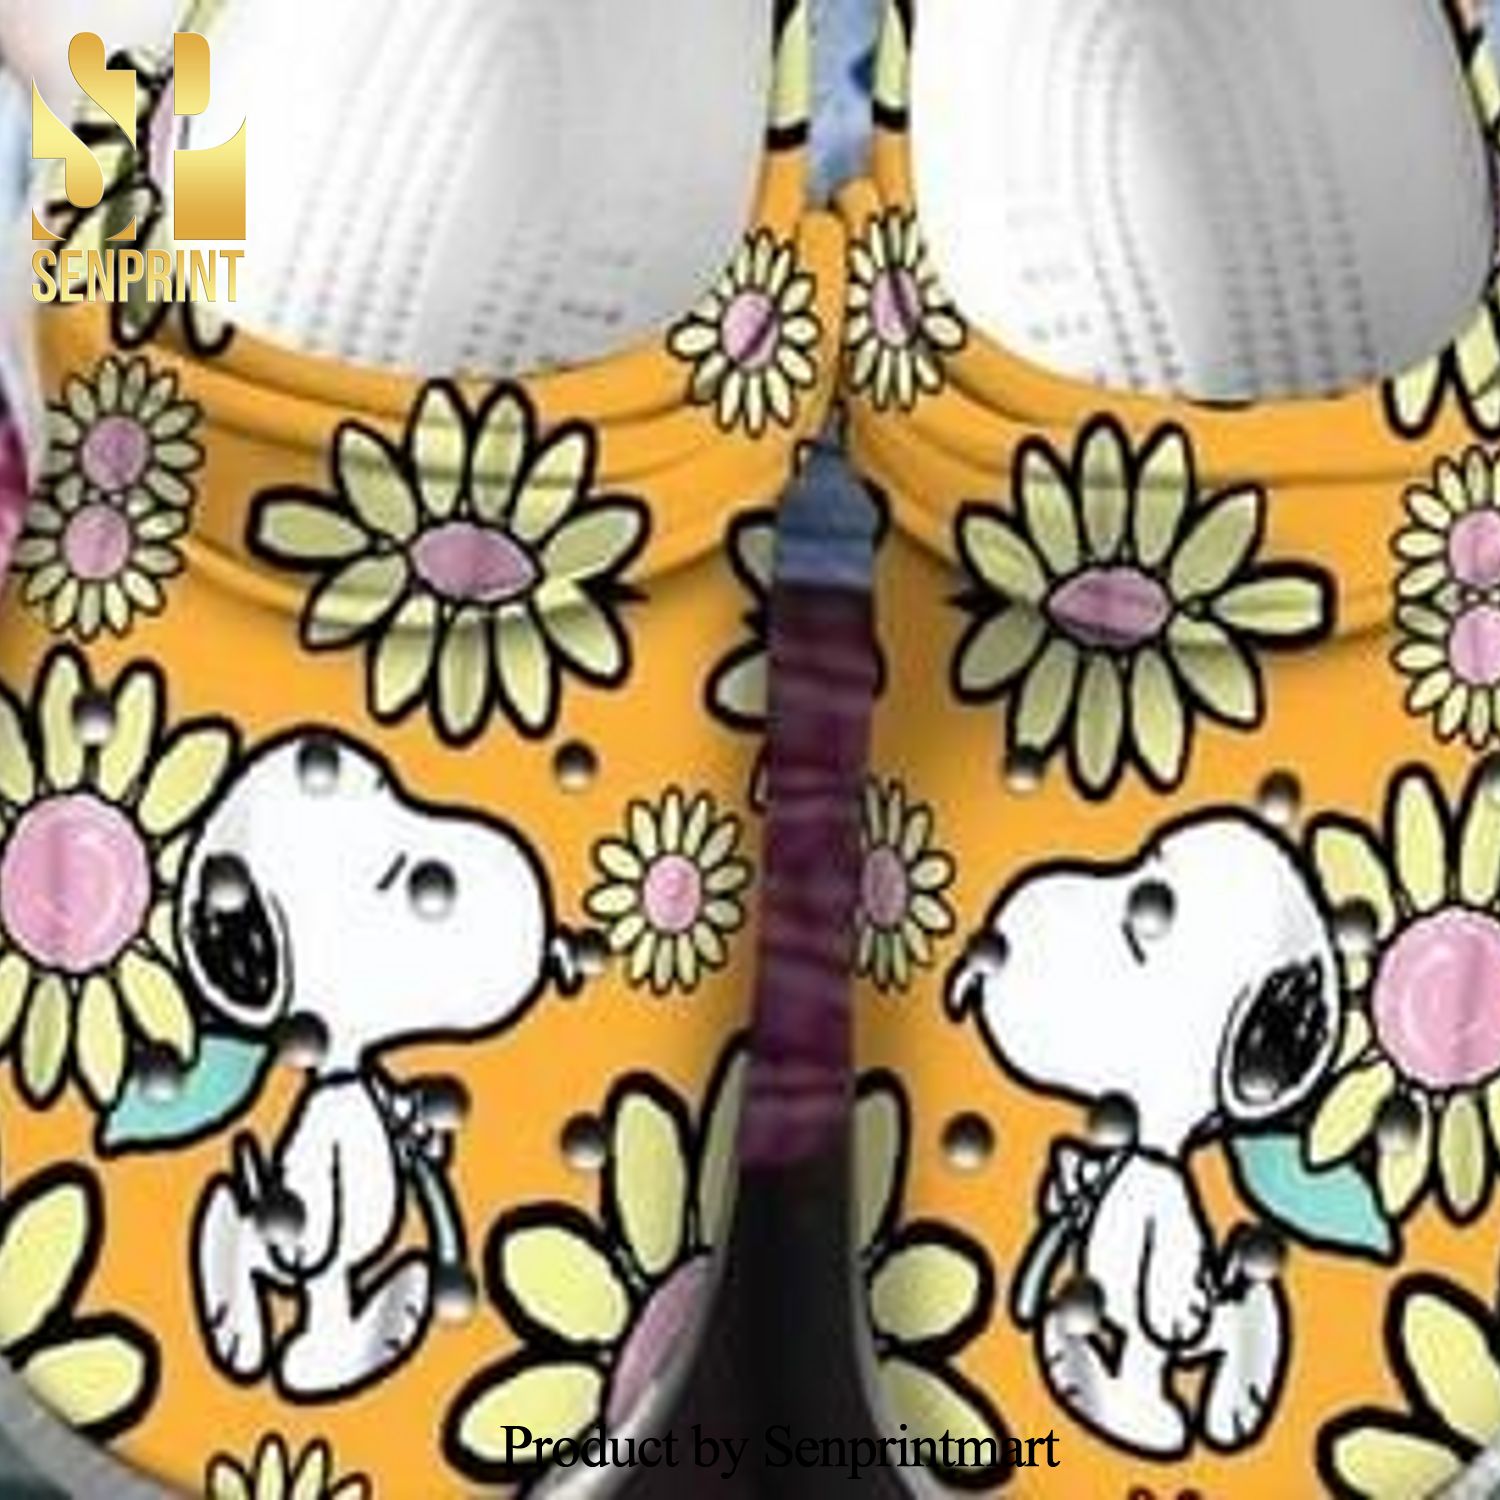 Snoopy Crocs 3D Shoes Snoopy Flower For Snoopy Lover Snoopy Classic Clogs Crocs Crocband Clog